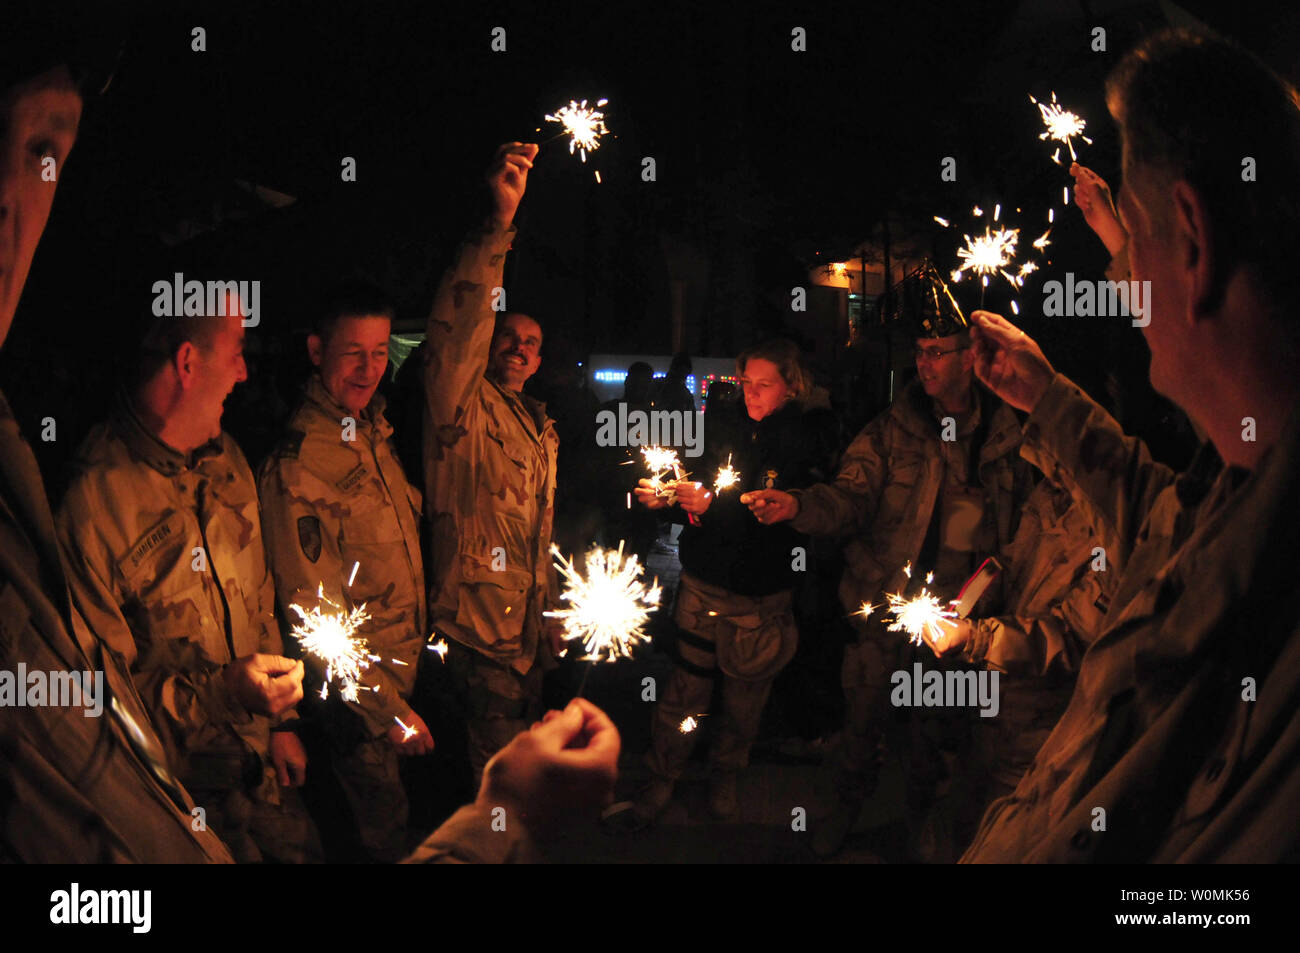 U.S. and coalition forces celebrates the New Year at Camp Eggers, Kabul, on New Years Eve in Afghanistan, December 31, 2011. UPI/Chris Fahey/DOD Stock Photo